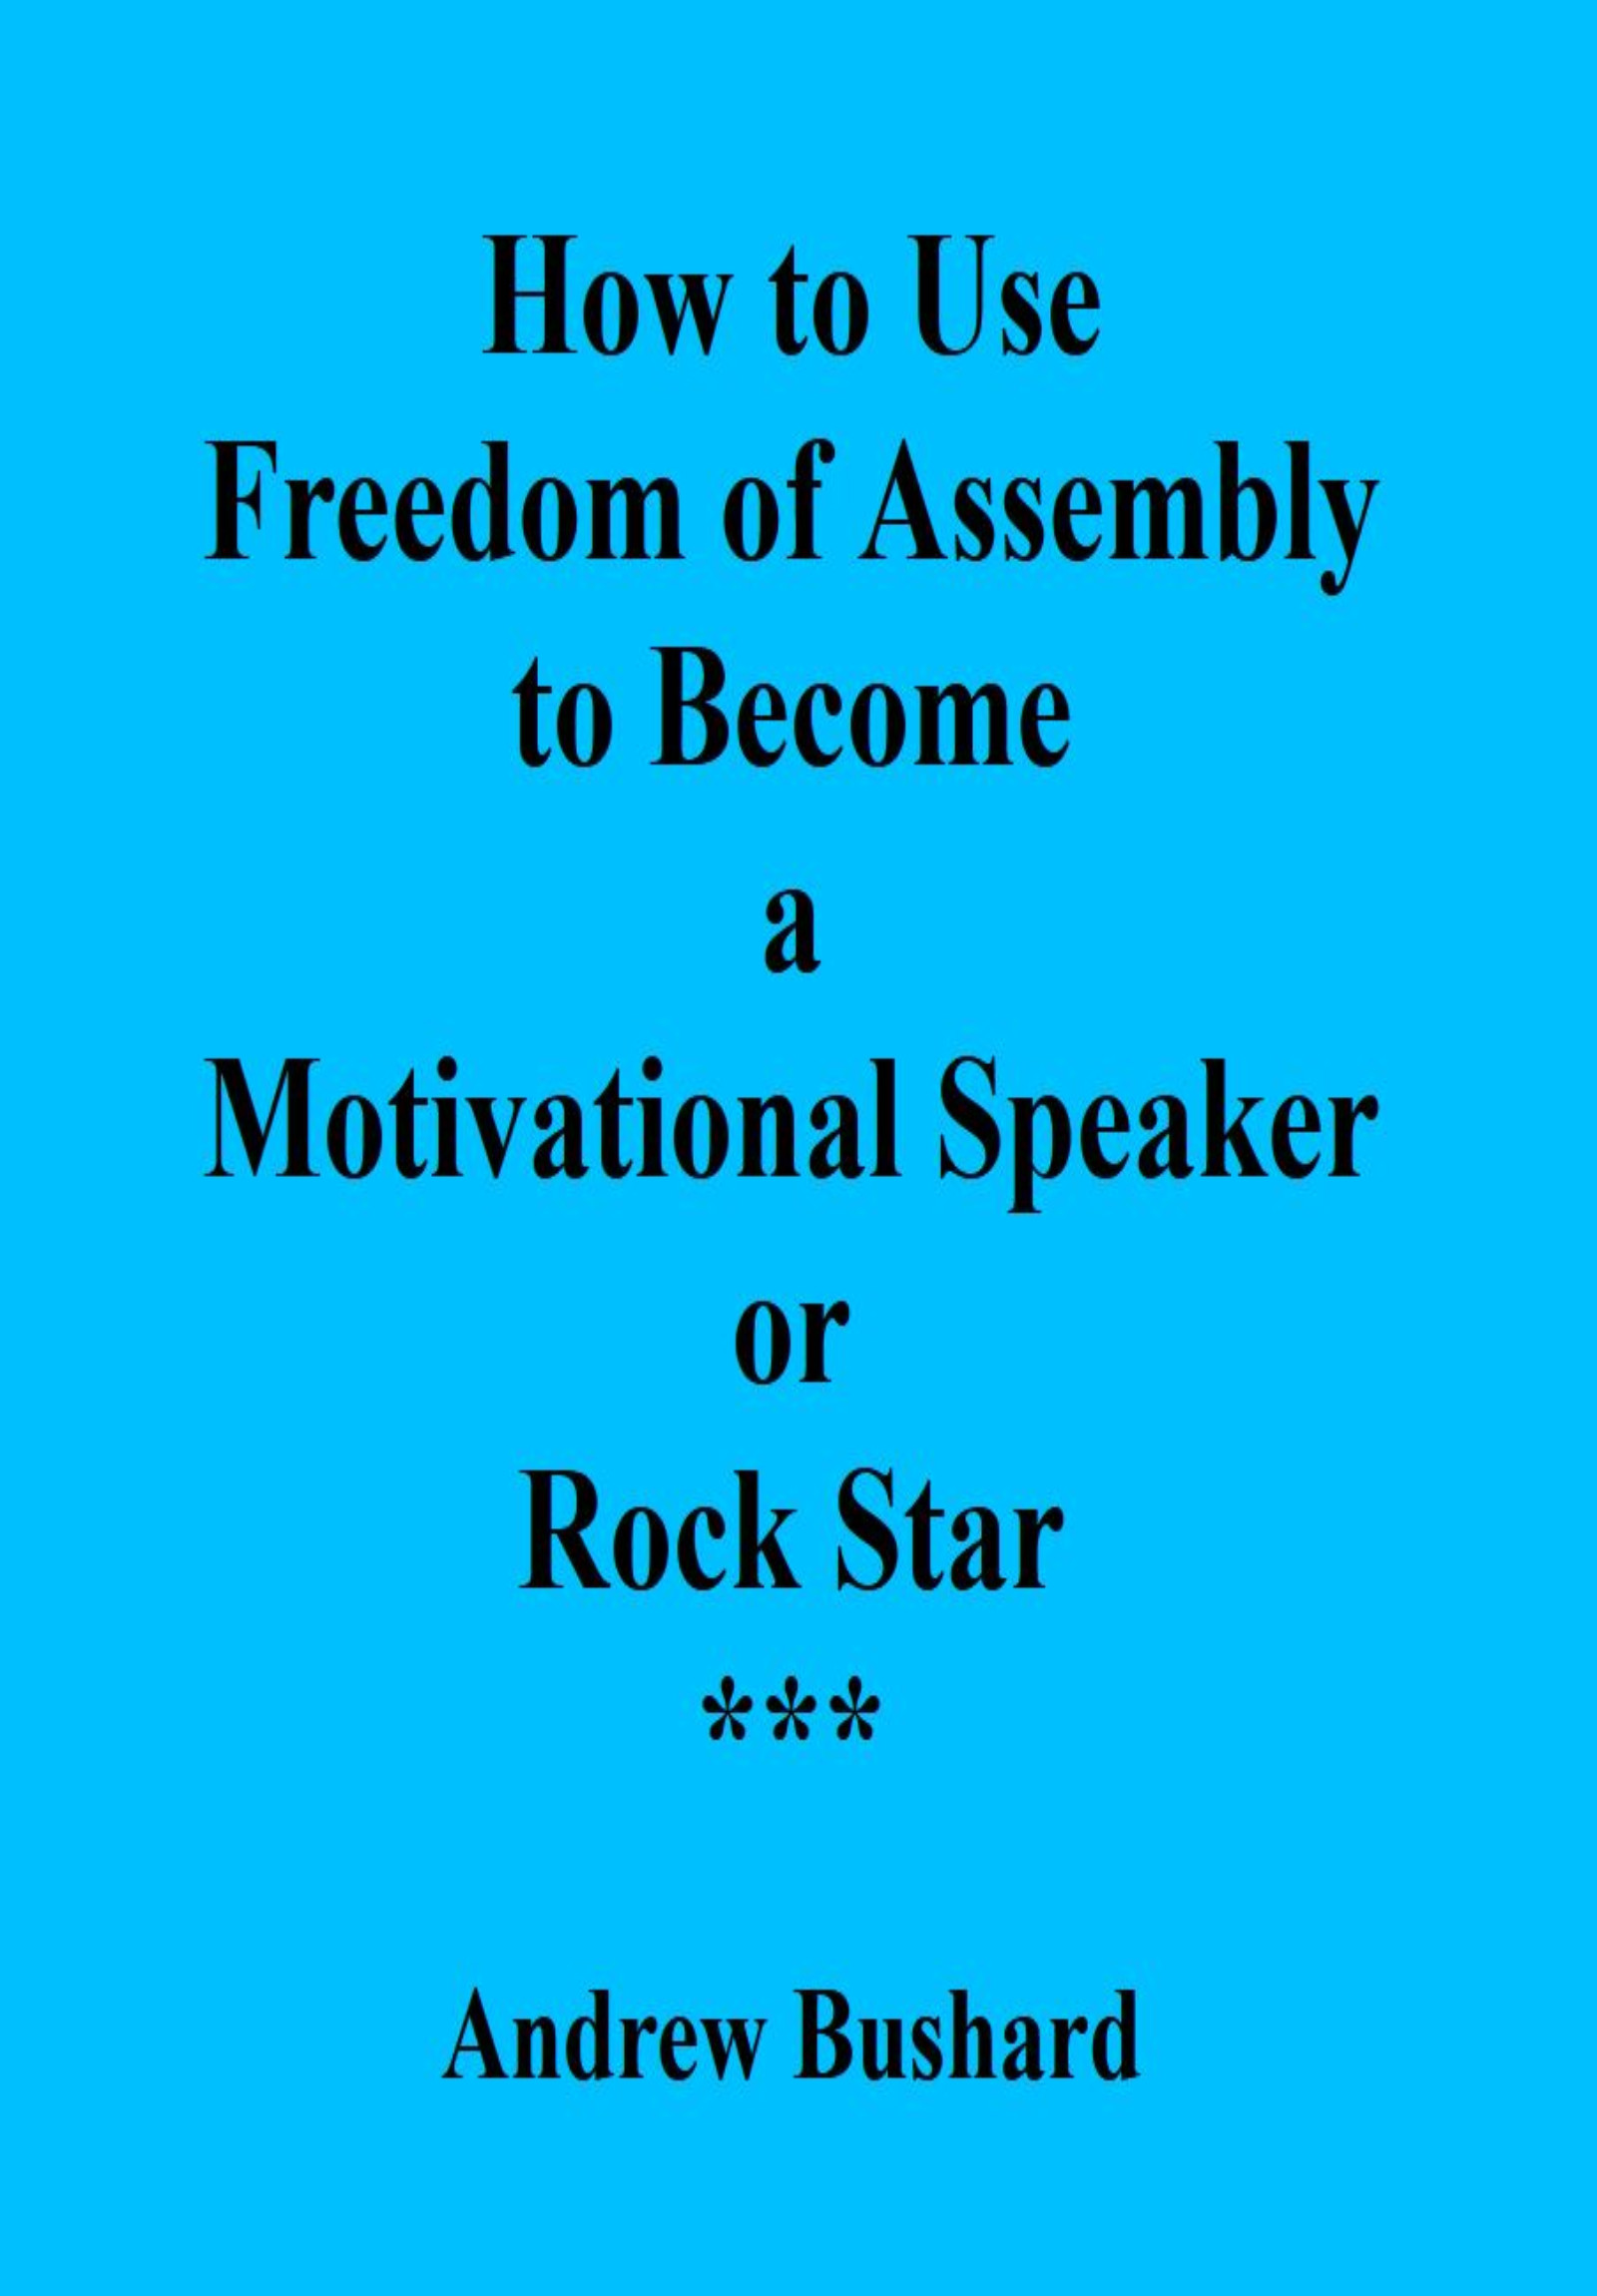 How to Use Freedom of Assembly to Become a Motivational Speaker or Rock Star's featured image